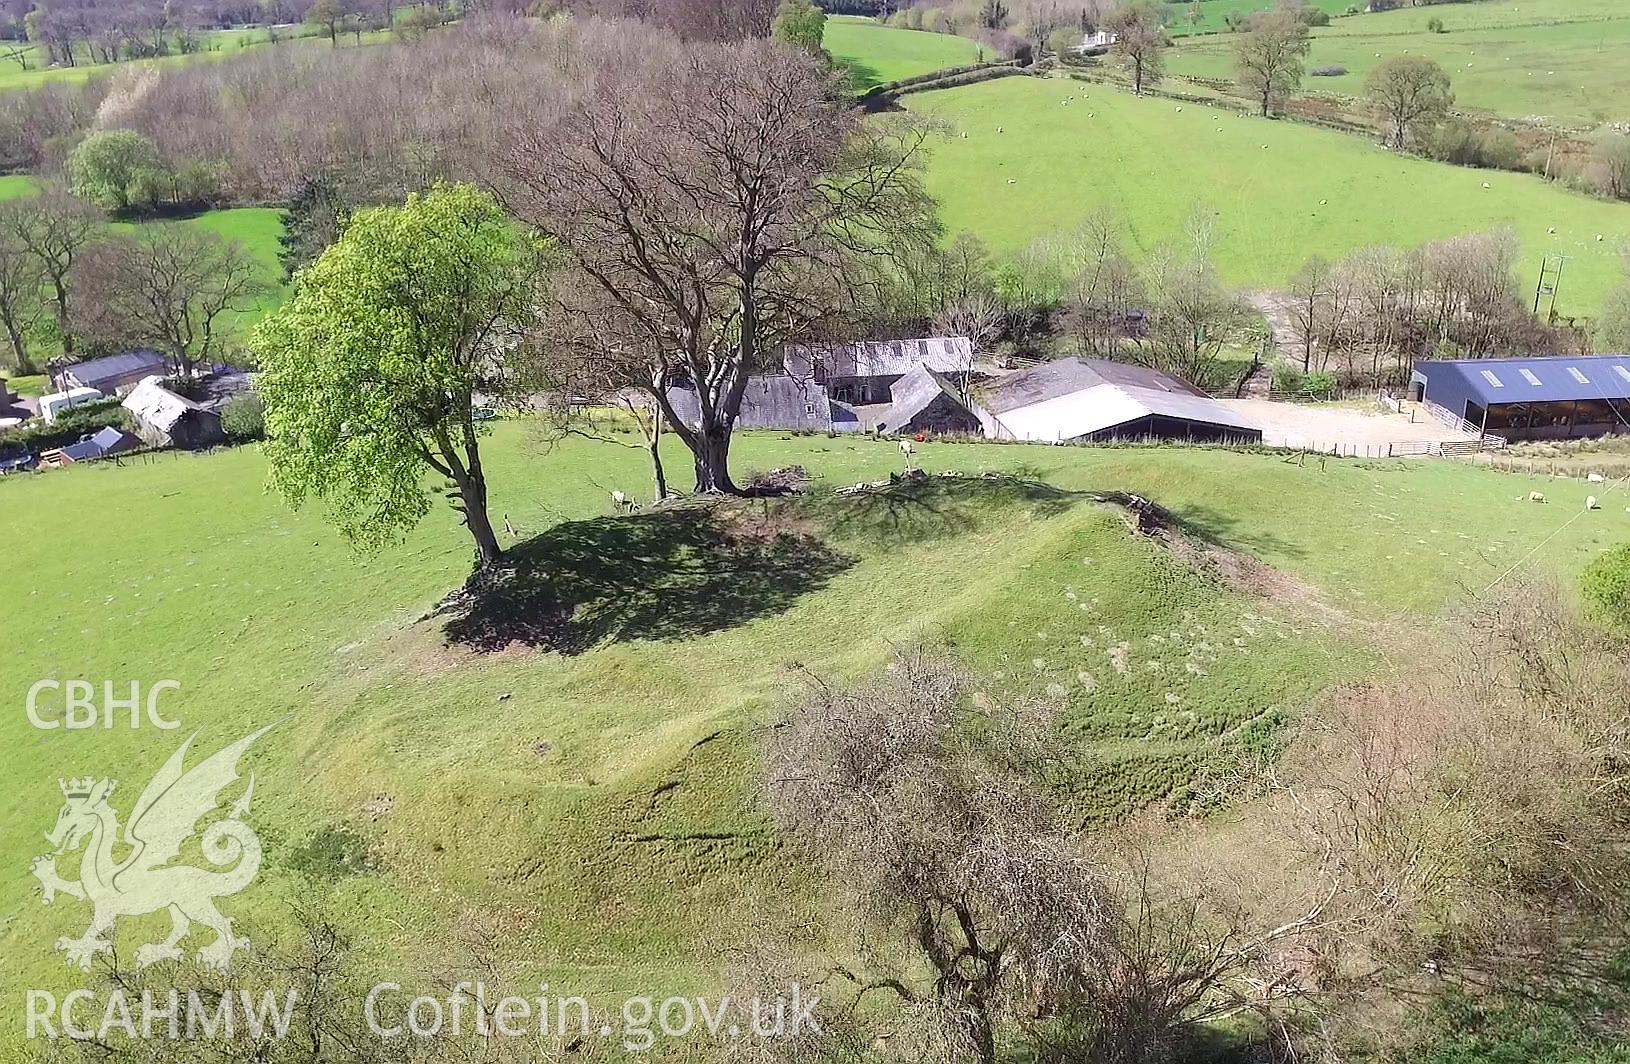 Colour photo showing Llanfor Earthworks, produced by Paul R. Davis,  May 2017.